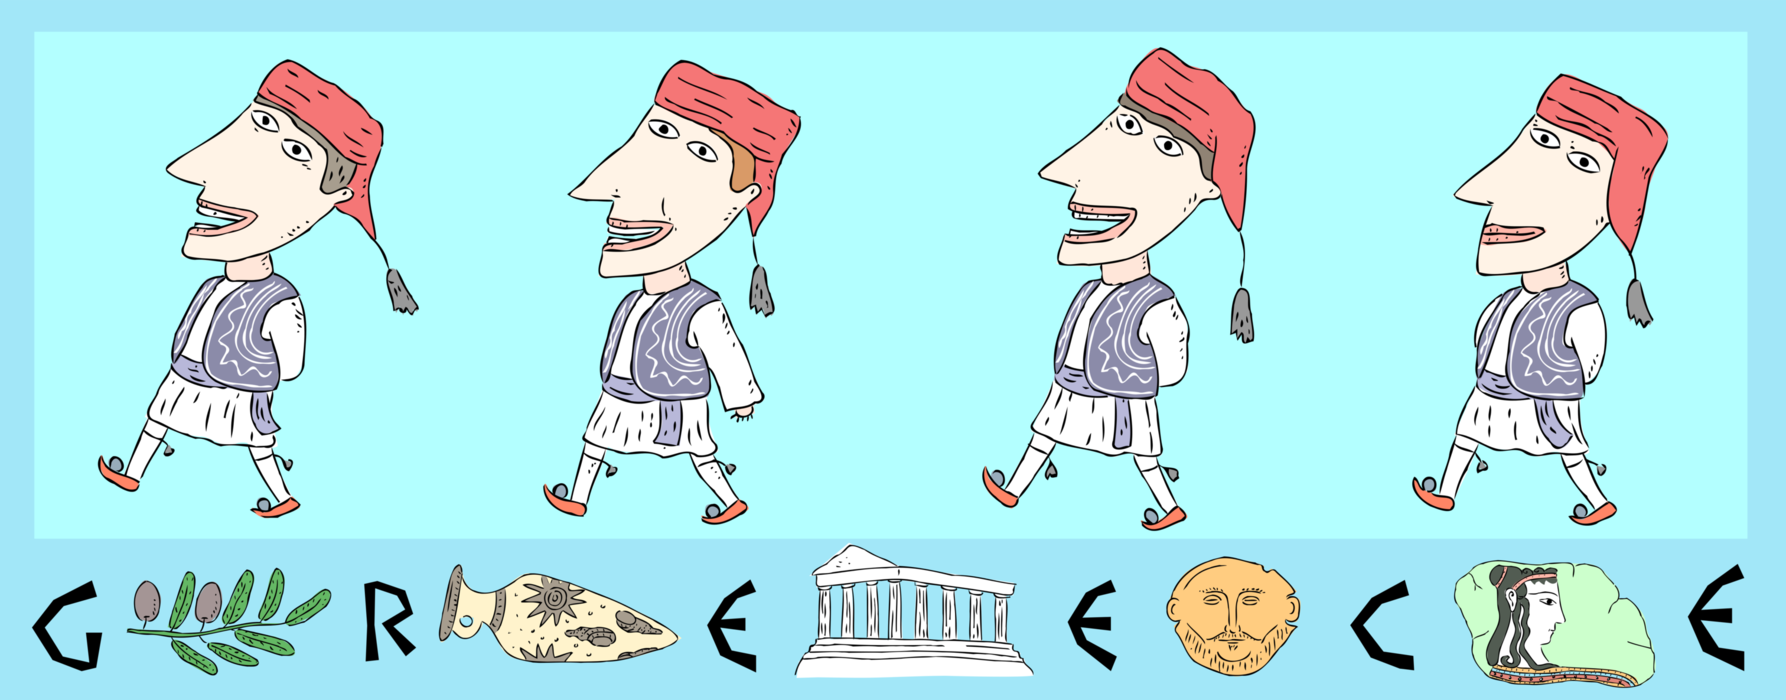 Vector Illustration of Greece Travel and Tourism with Native Costumes